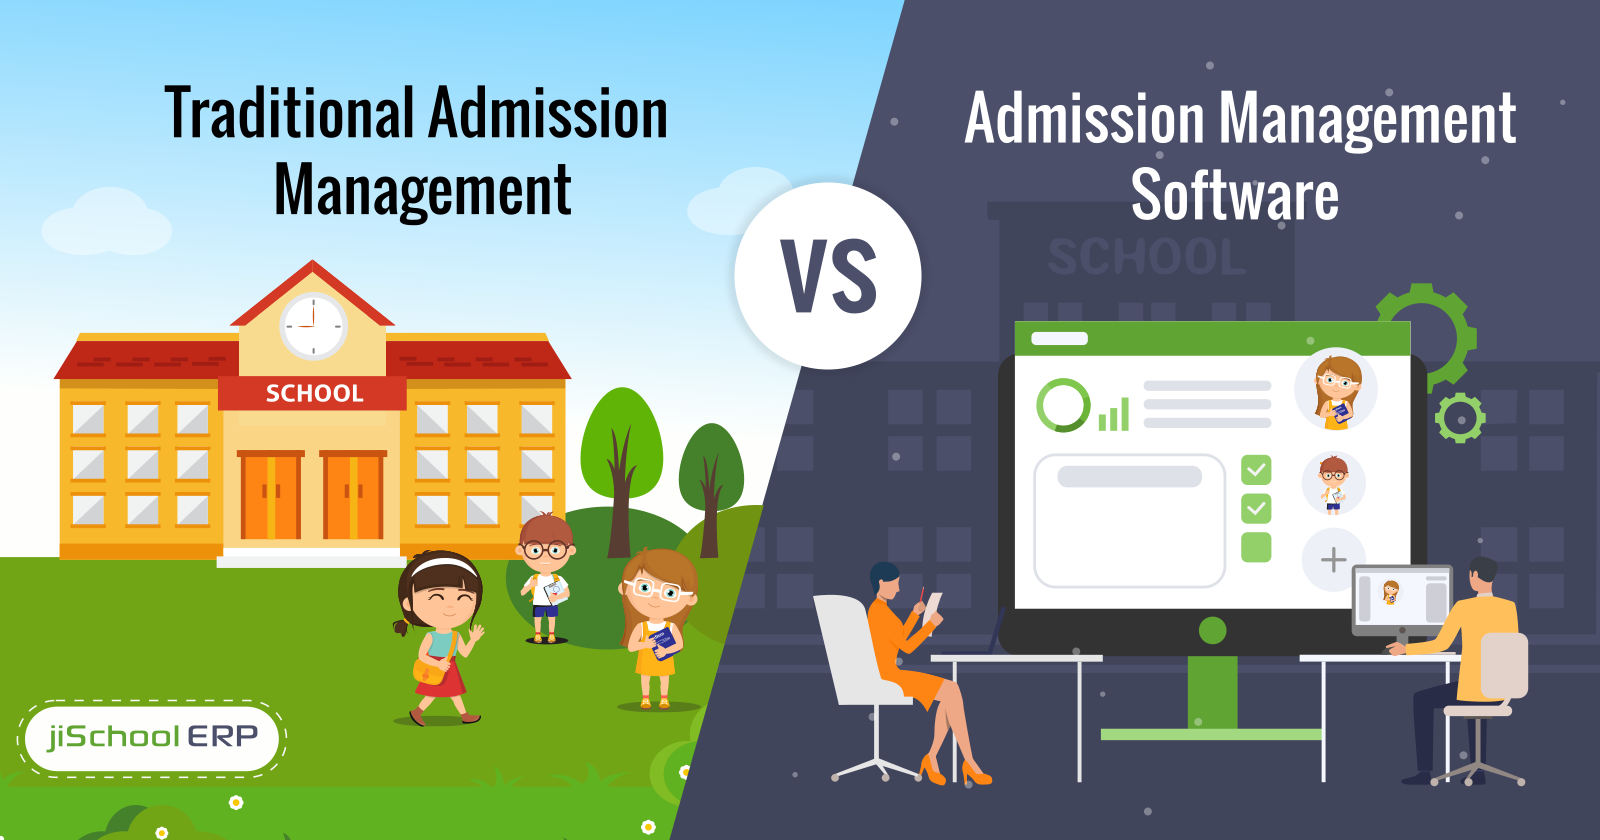 Traditional Admission Management Versus the Admission Management Software